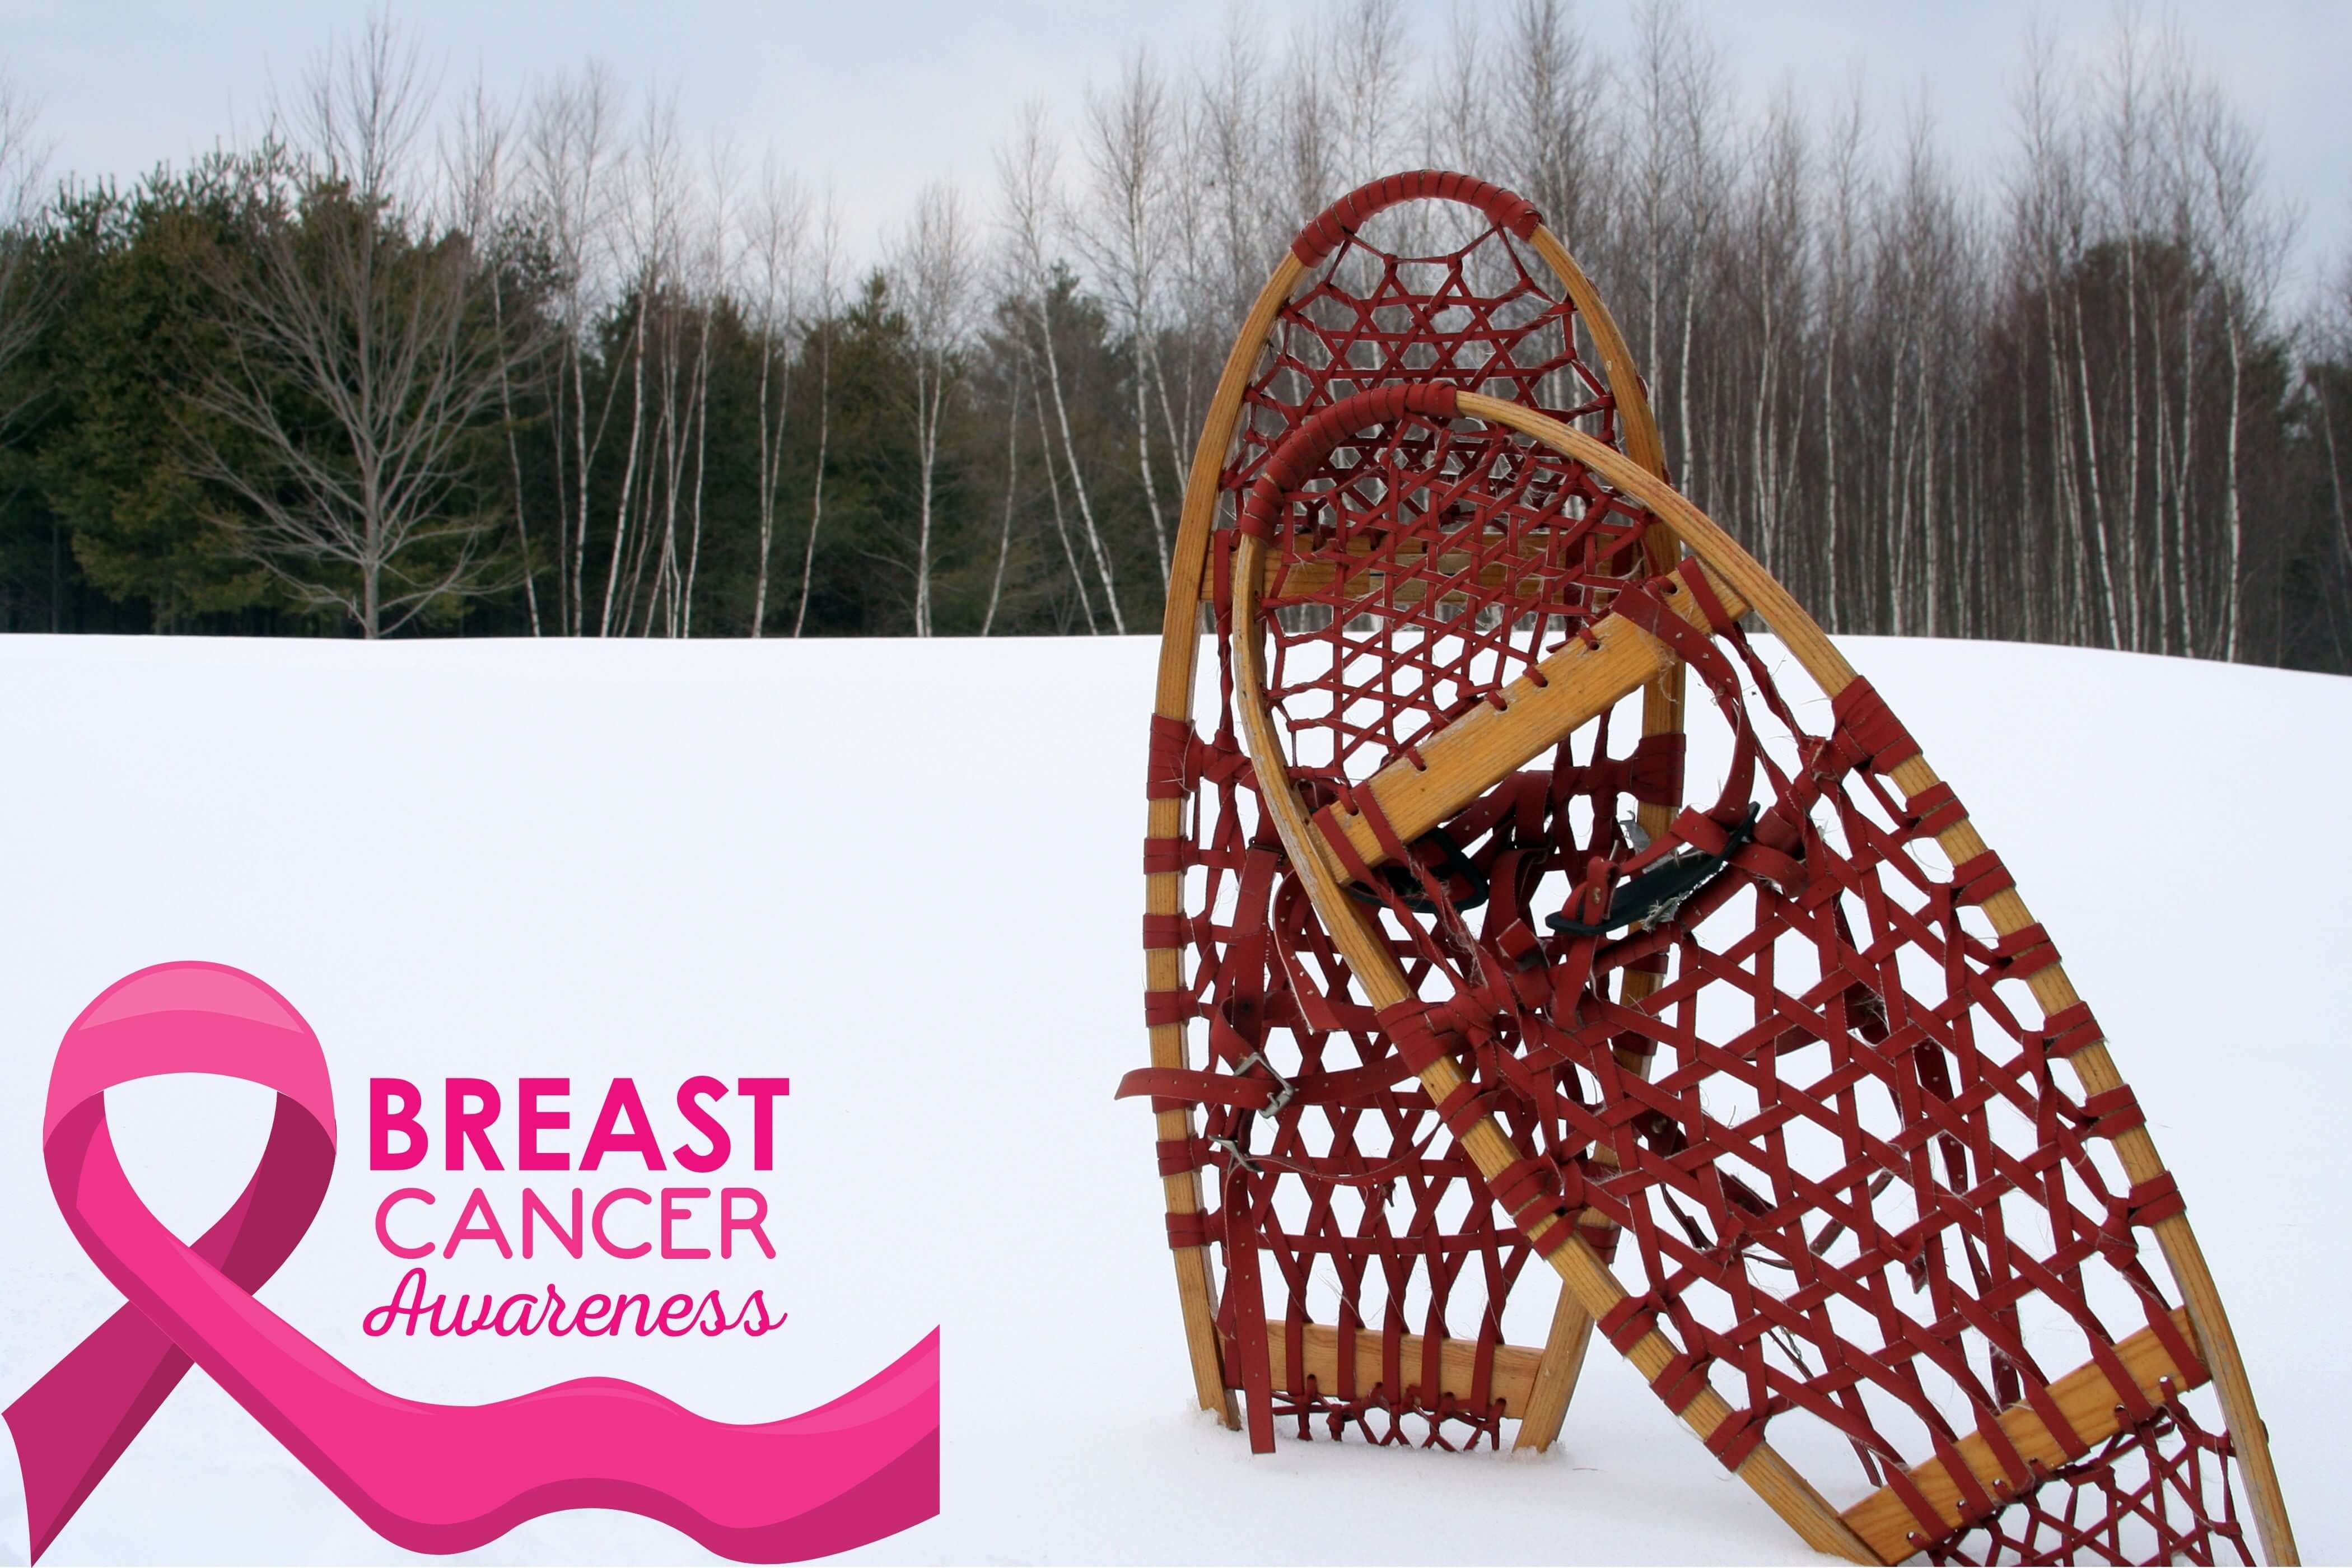 Snowshoe for the Cure Event - snowshoes in the snow with the Breast Cancer Awareness ribbon